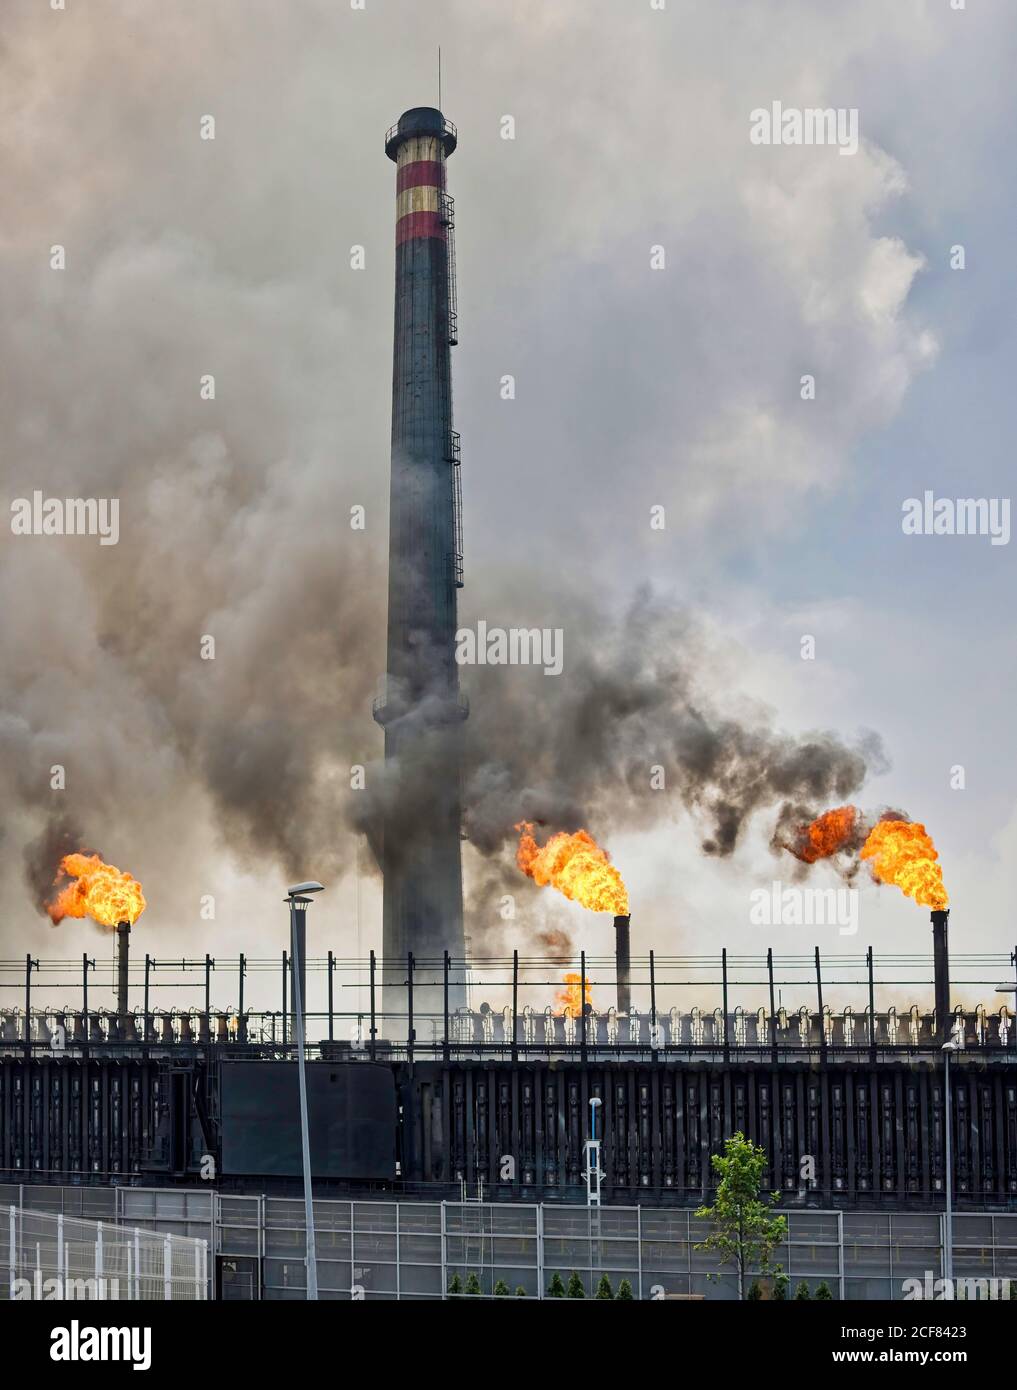 Weathered industrial buildings and pipes emitting smoke and flames at coking factory Stock Photo